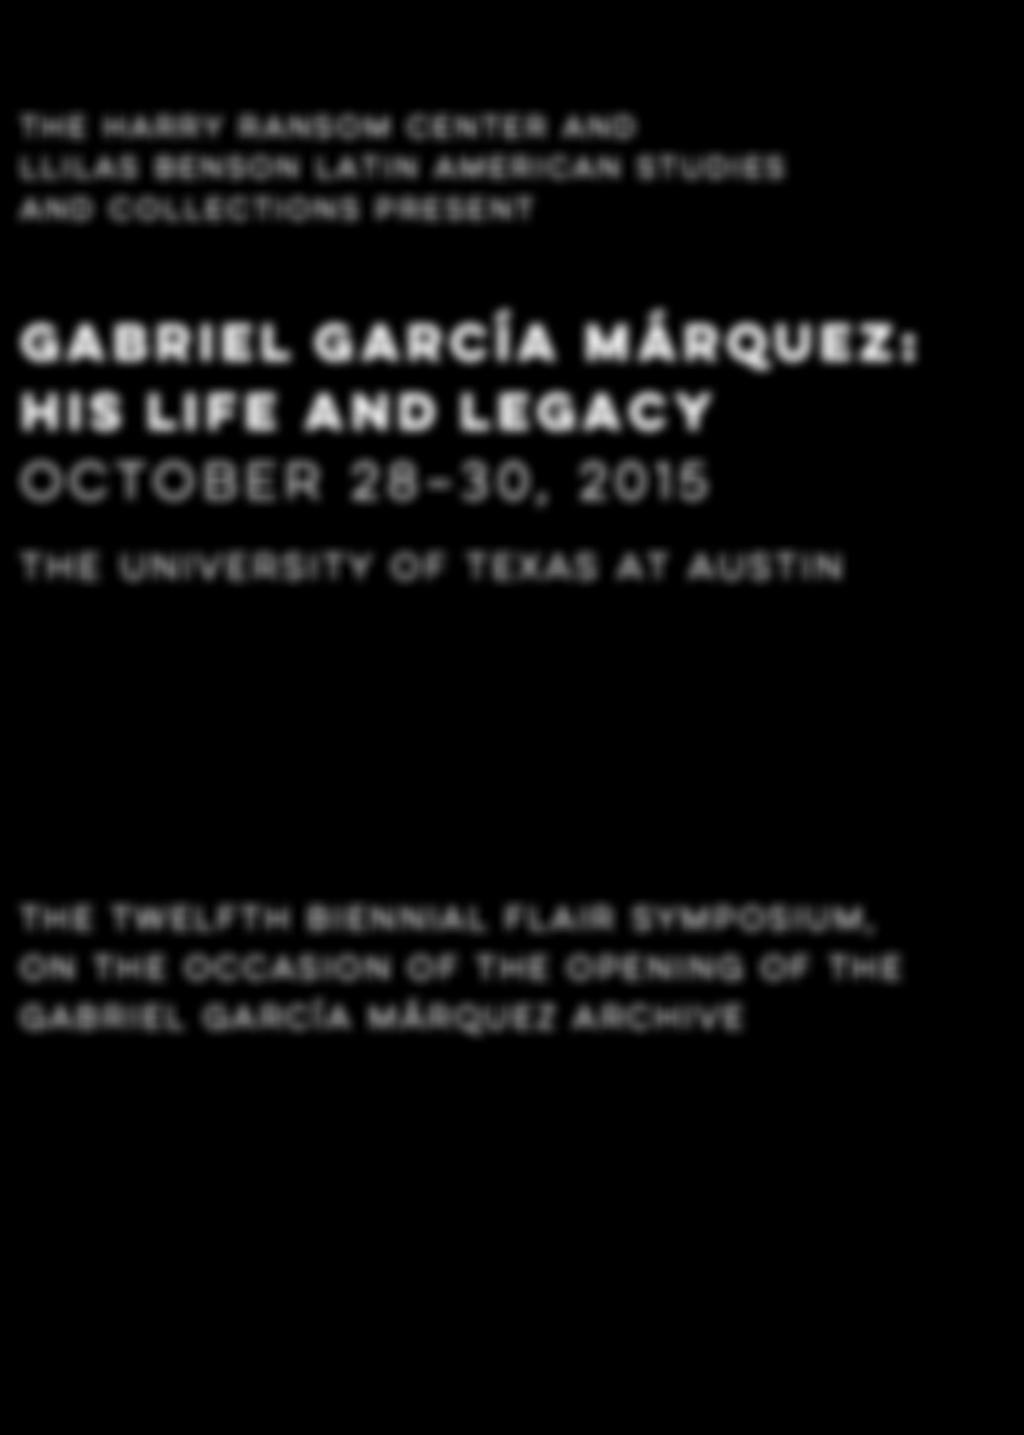 The Harry Ransom Center and LLILAS Benson Latin American Studies and Collections present Gabriel García Márquez: His Life and Legacy October 28